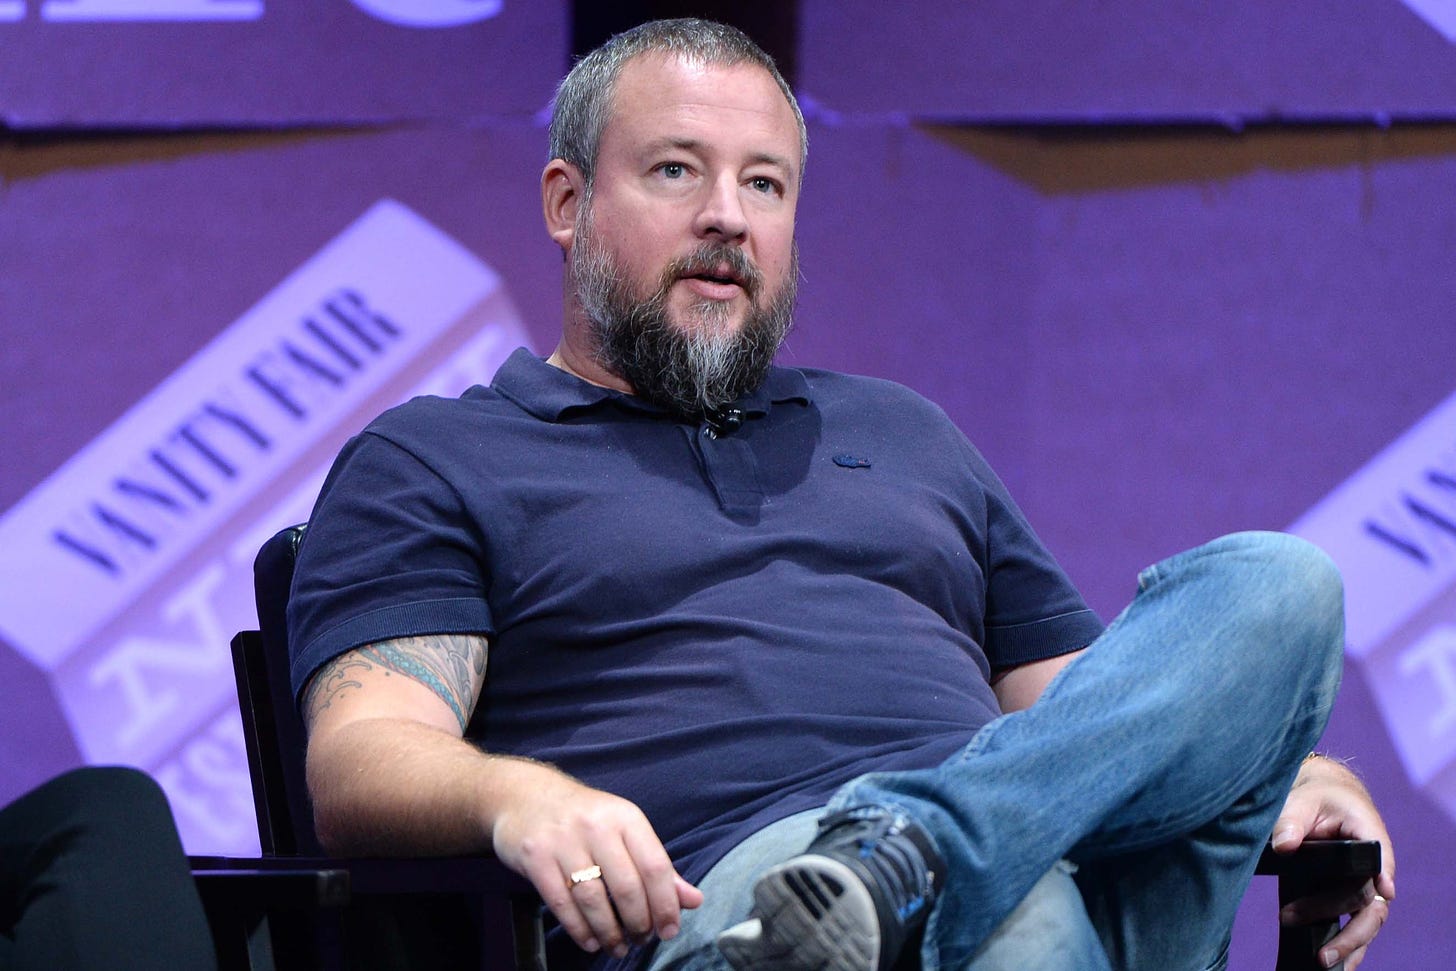 Vice Media's founder Shane Smith is a Vegas 'high roller'